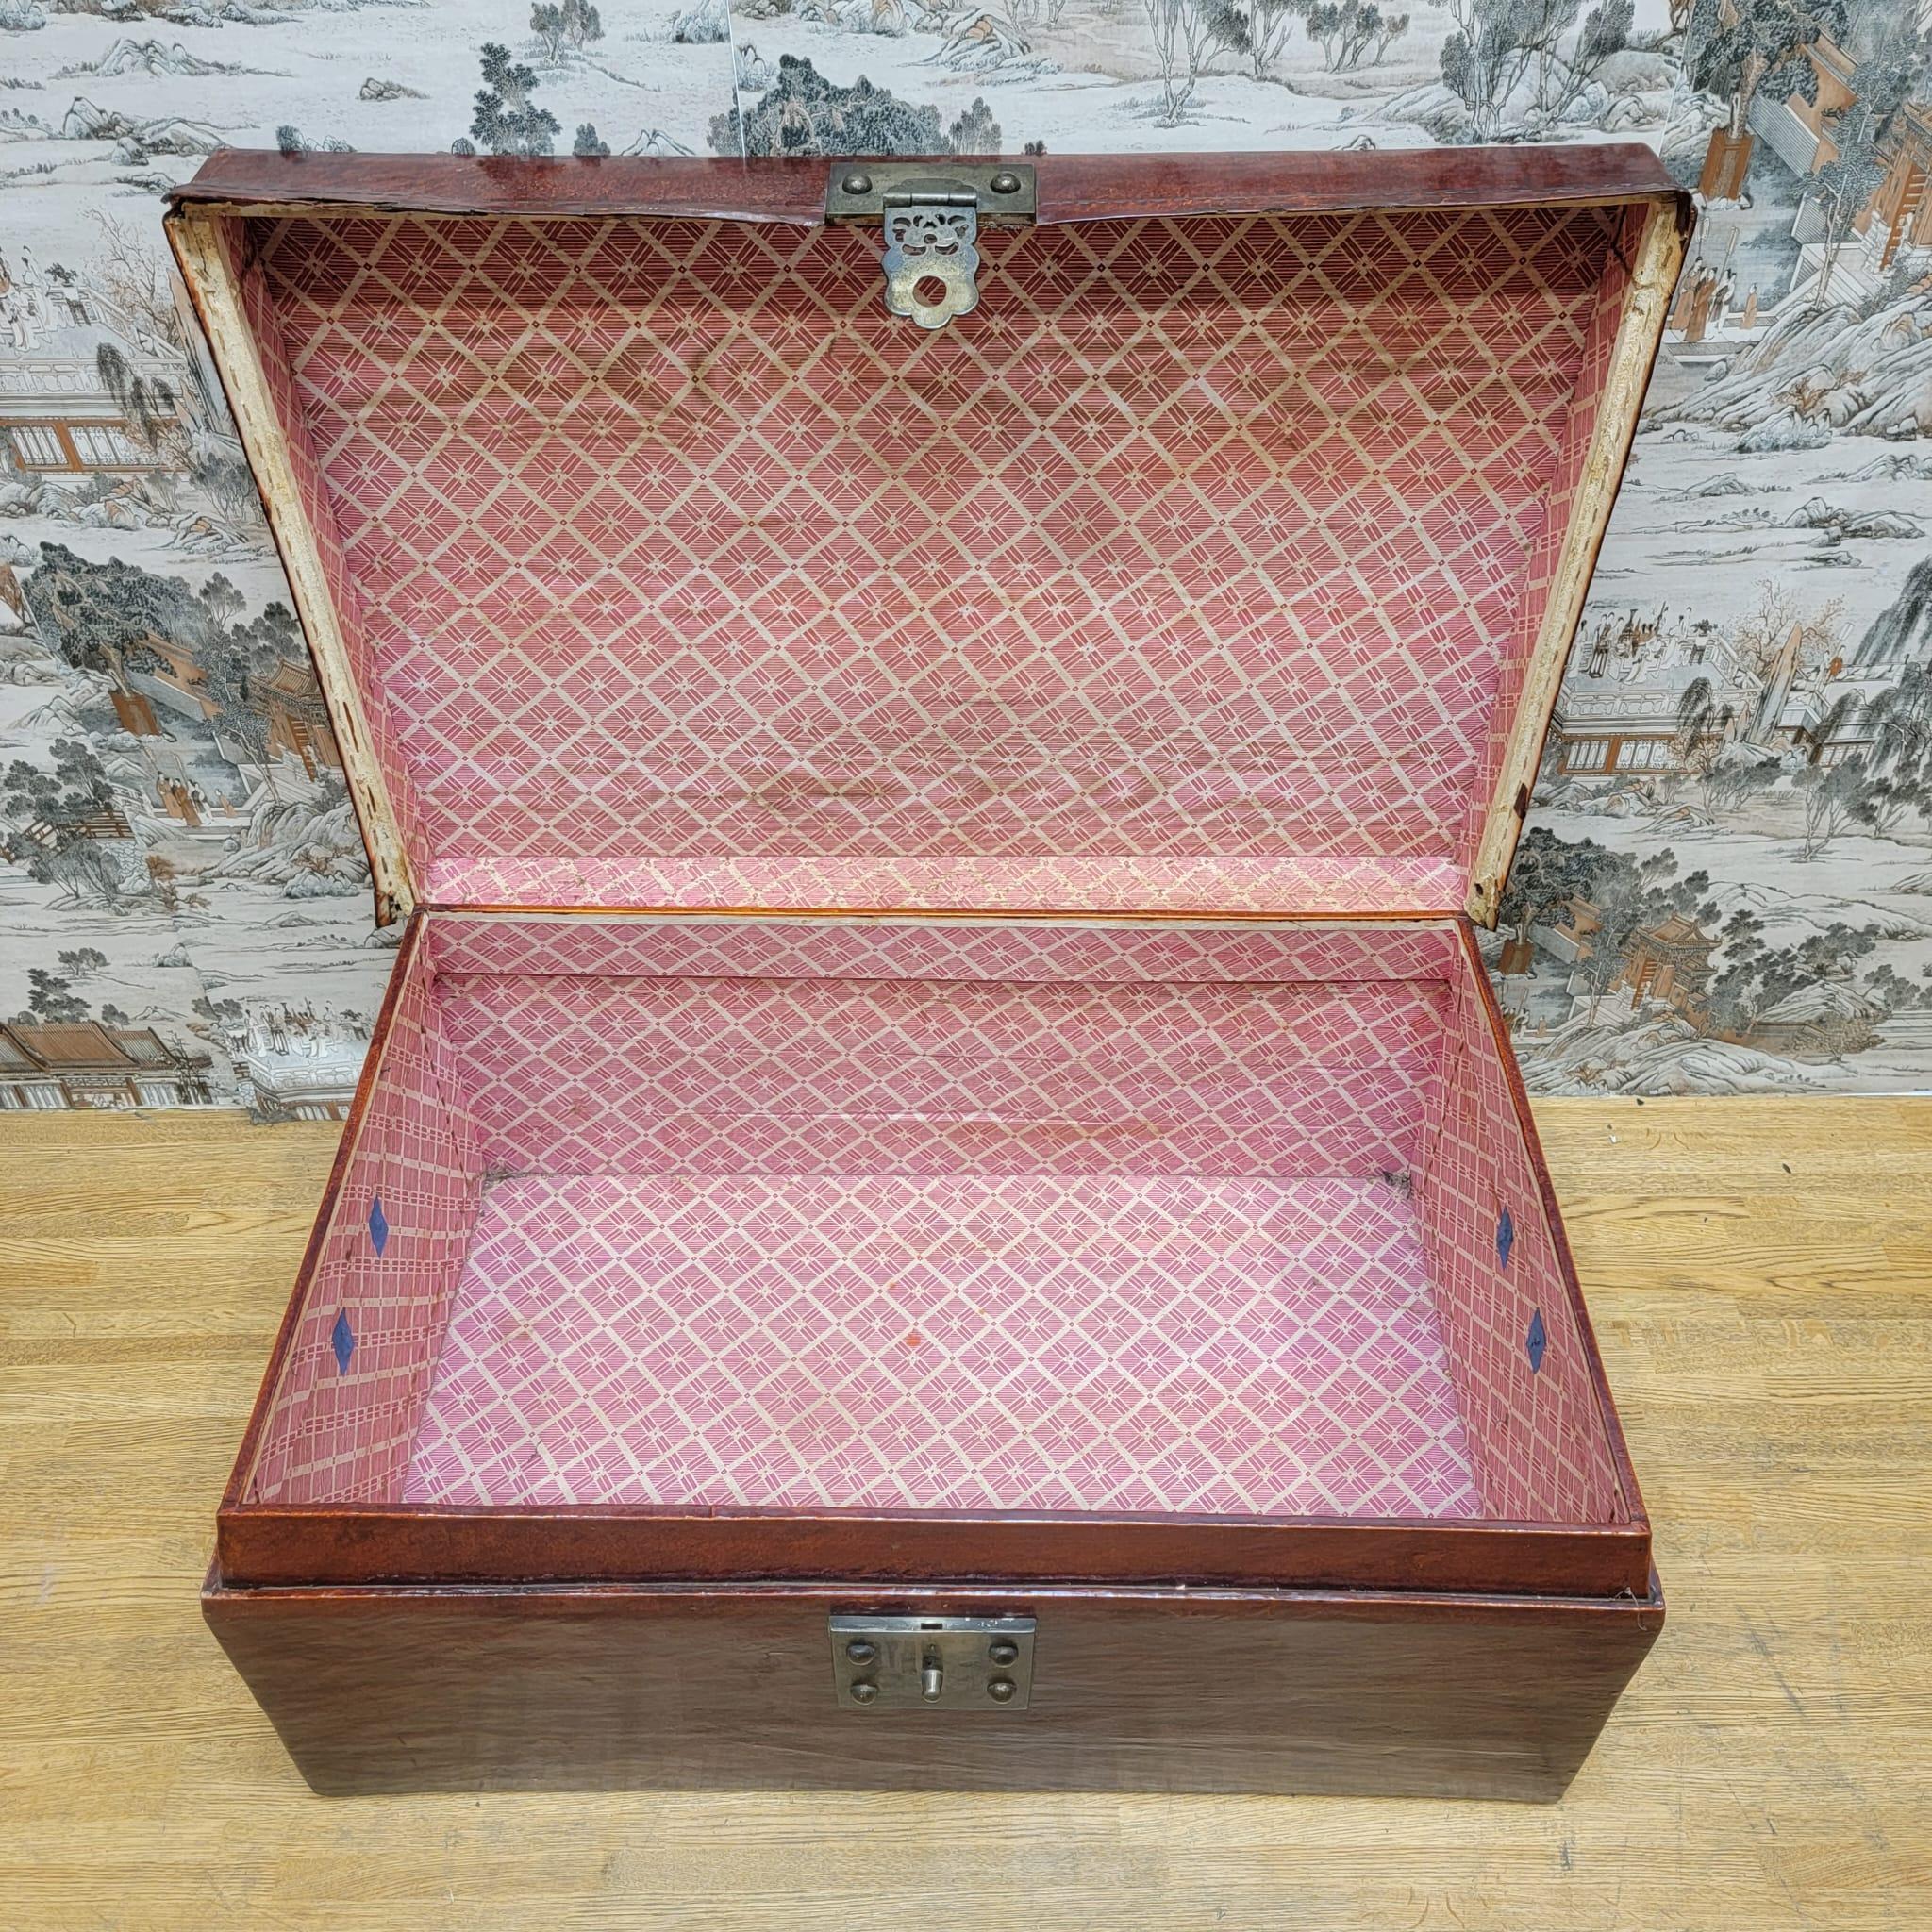 Antique Shanxi province red elm leather wrapped travel box.

This antique travel box with lid and original hardware is from the Shanxi Province of China. It is wrapped in leather with its original color and patina. 

Circa: